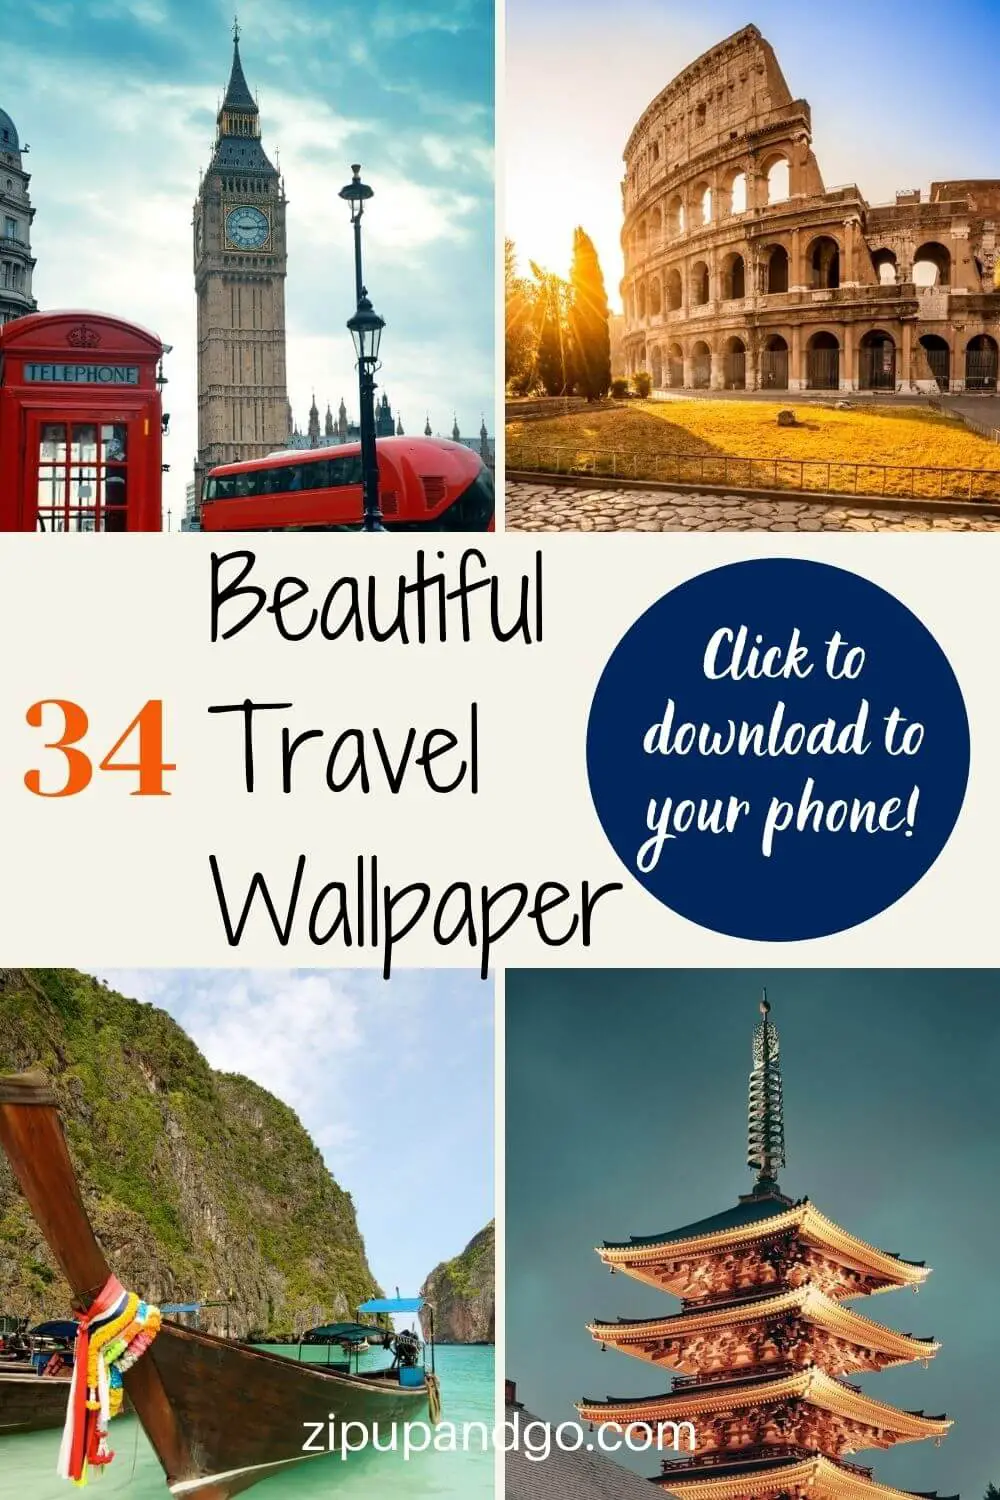 34 Beautiful Travel Aesthetic Wallpapers To Dream About Travel - Zip Up